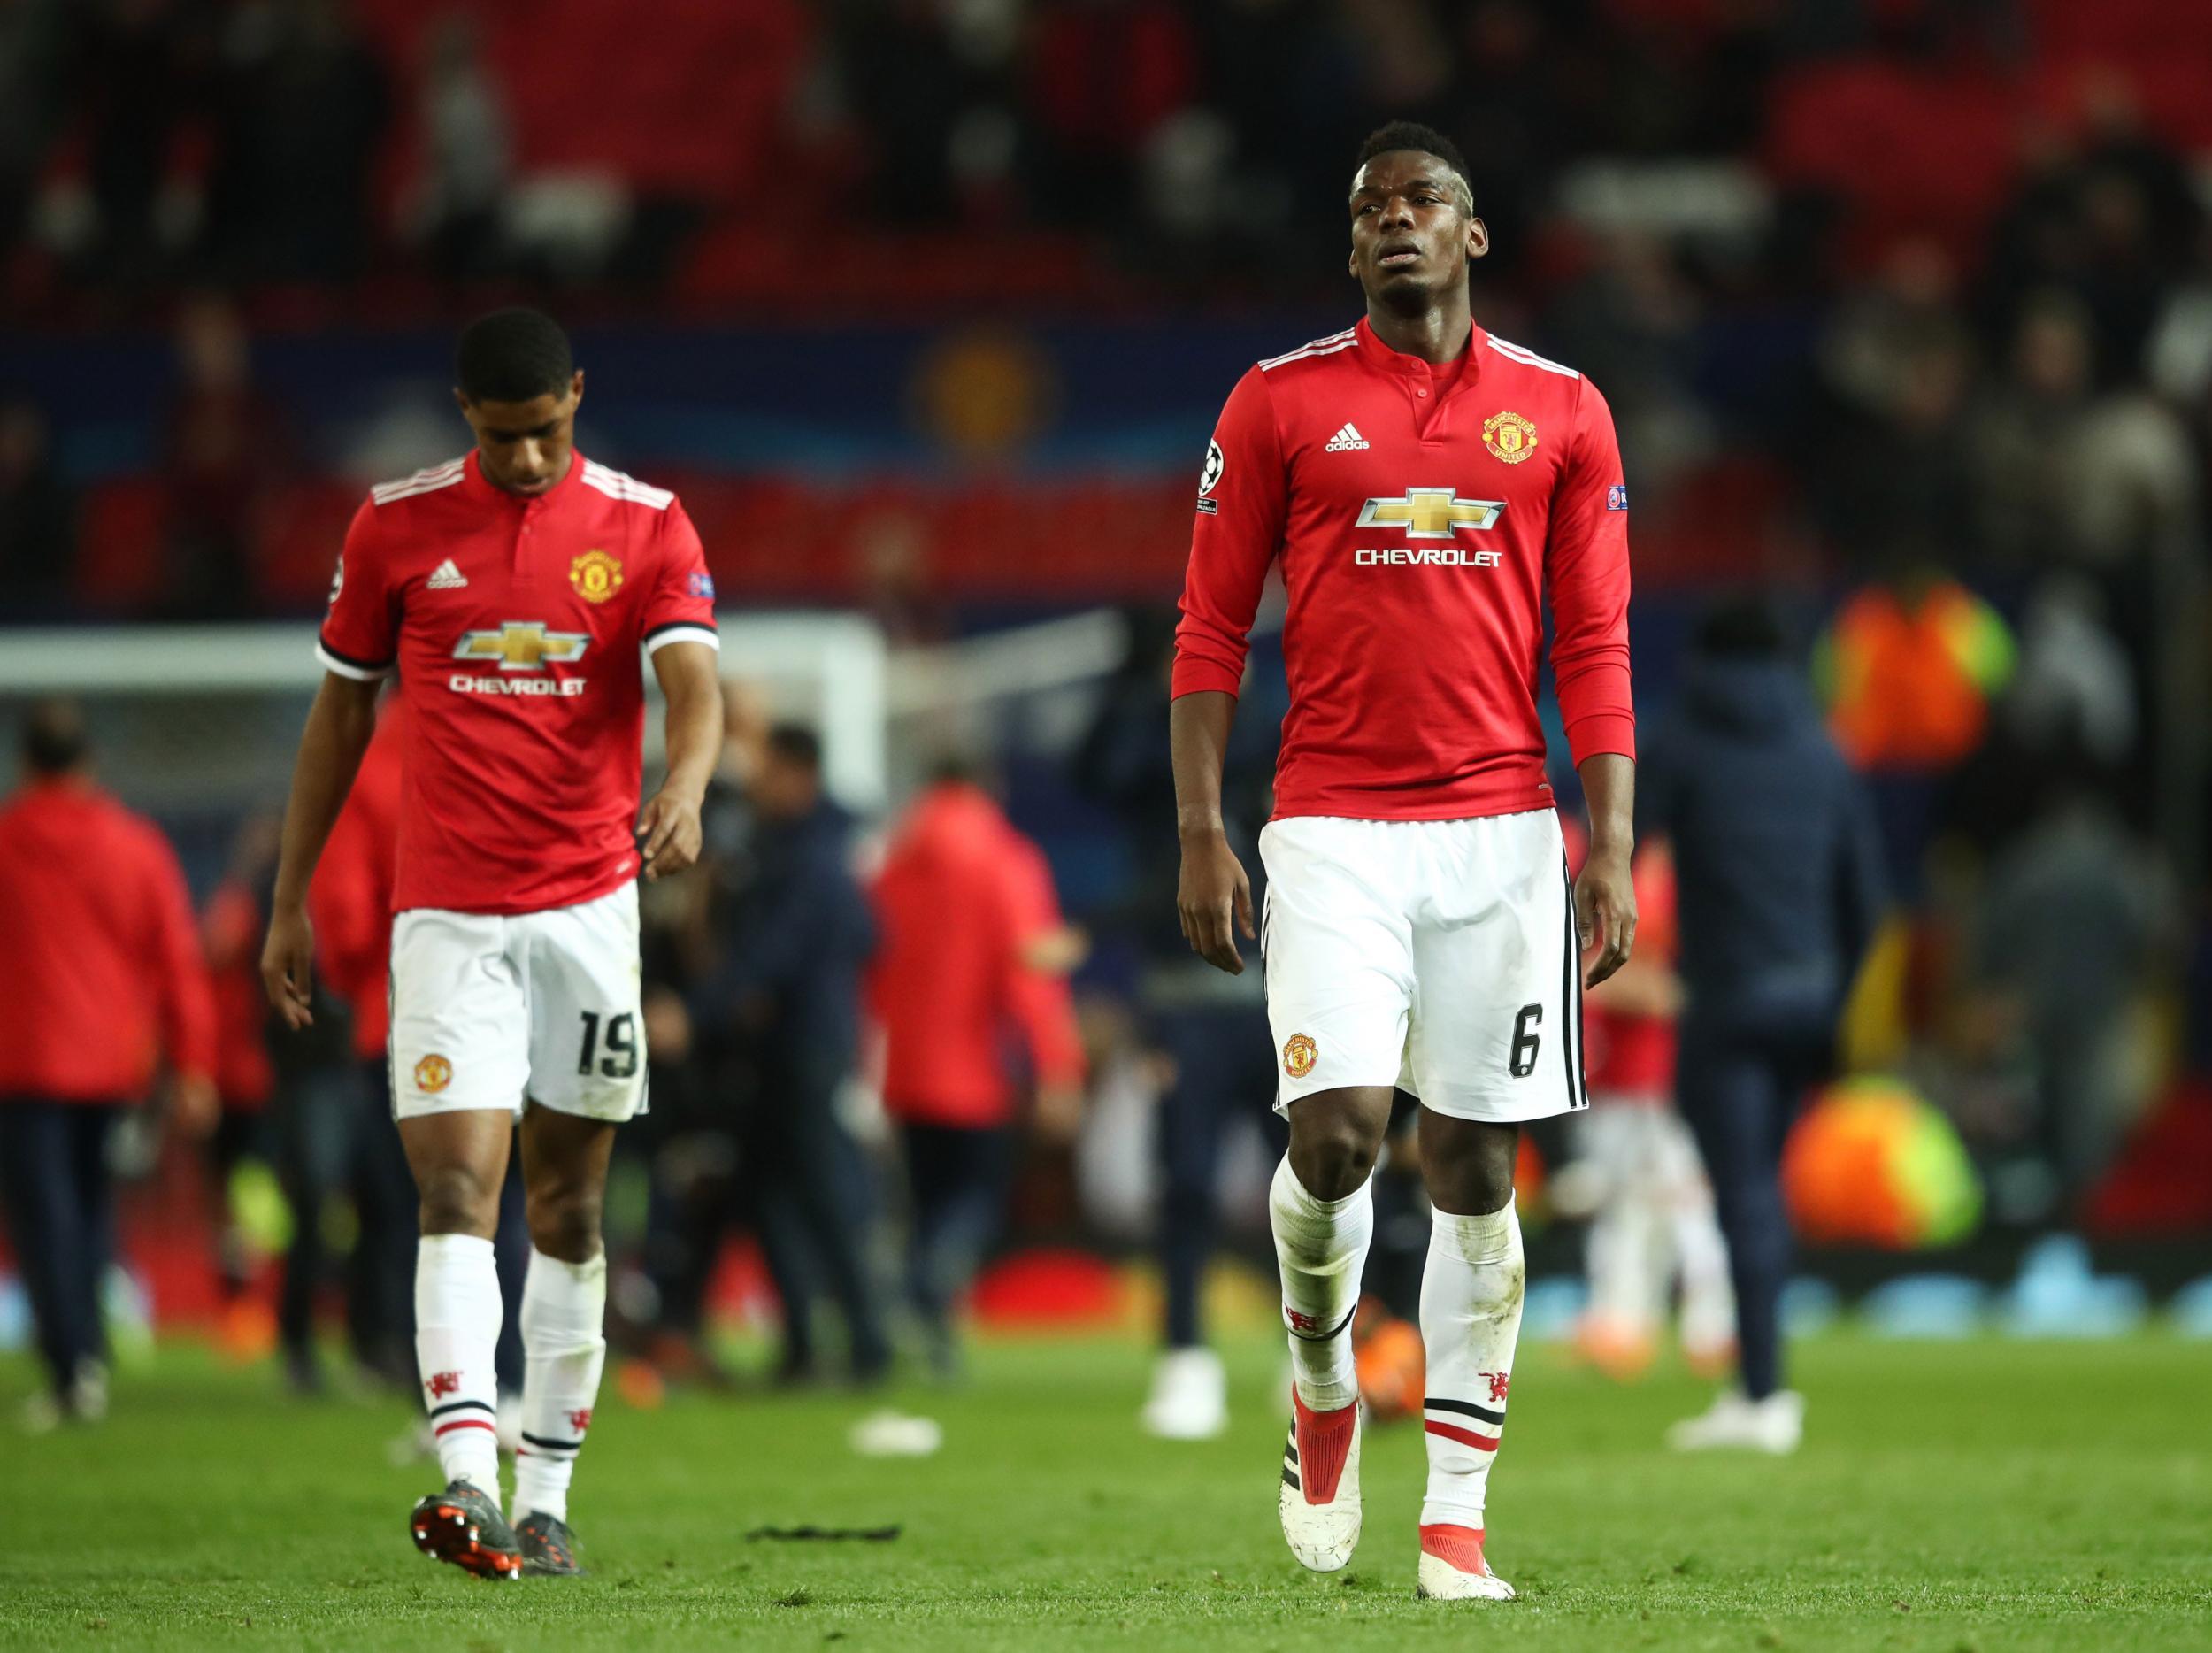 Manchester United exited the Champions League after defeat to Sevilla